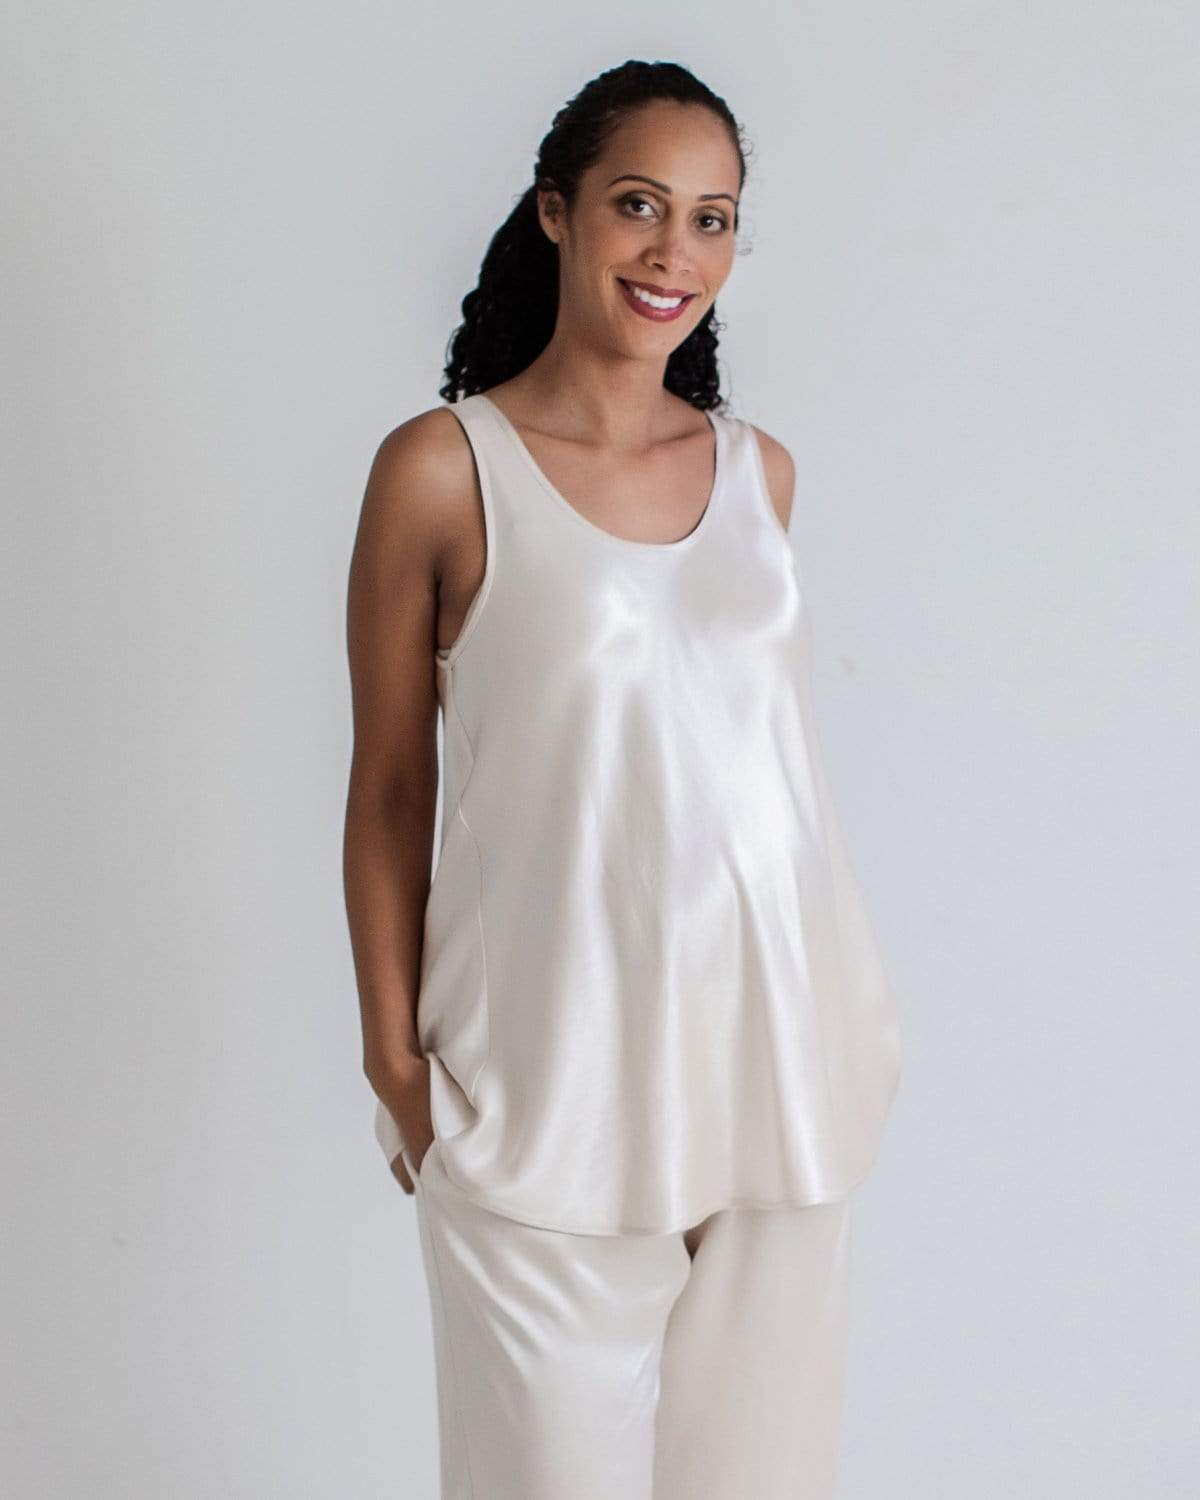 RelaxMaternity 5300 Cotton Maternity Camisole Singlet Cotton Brand New